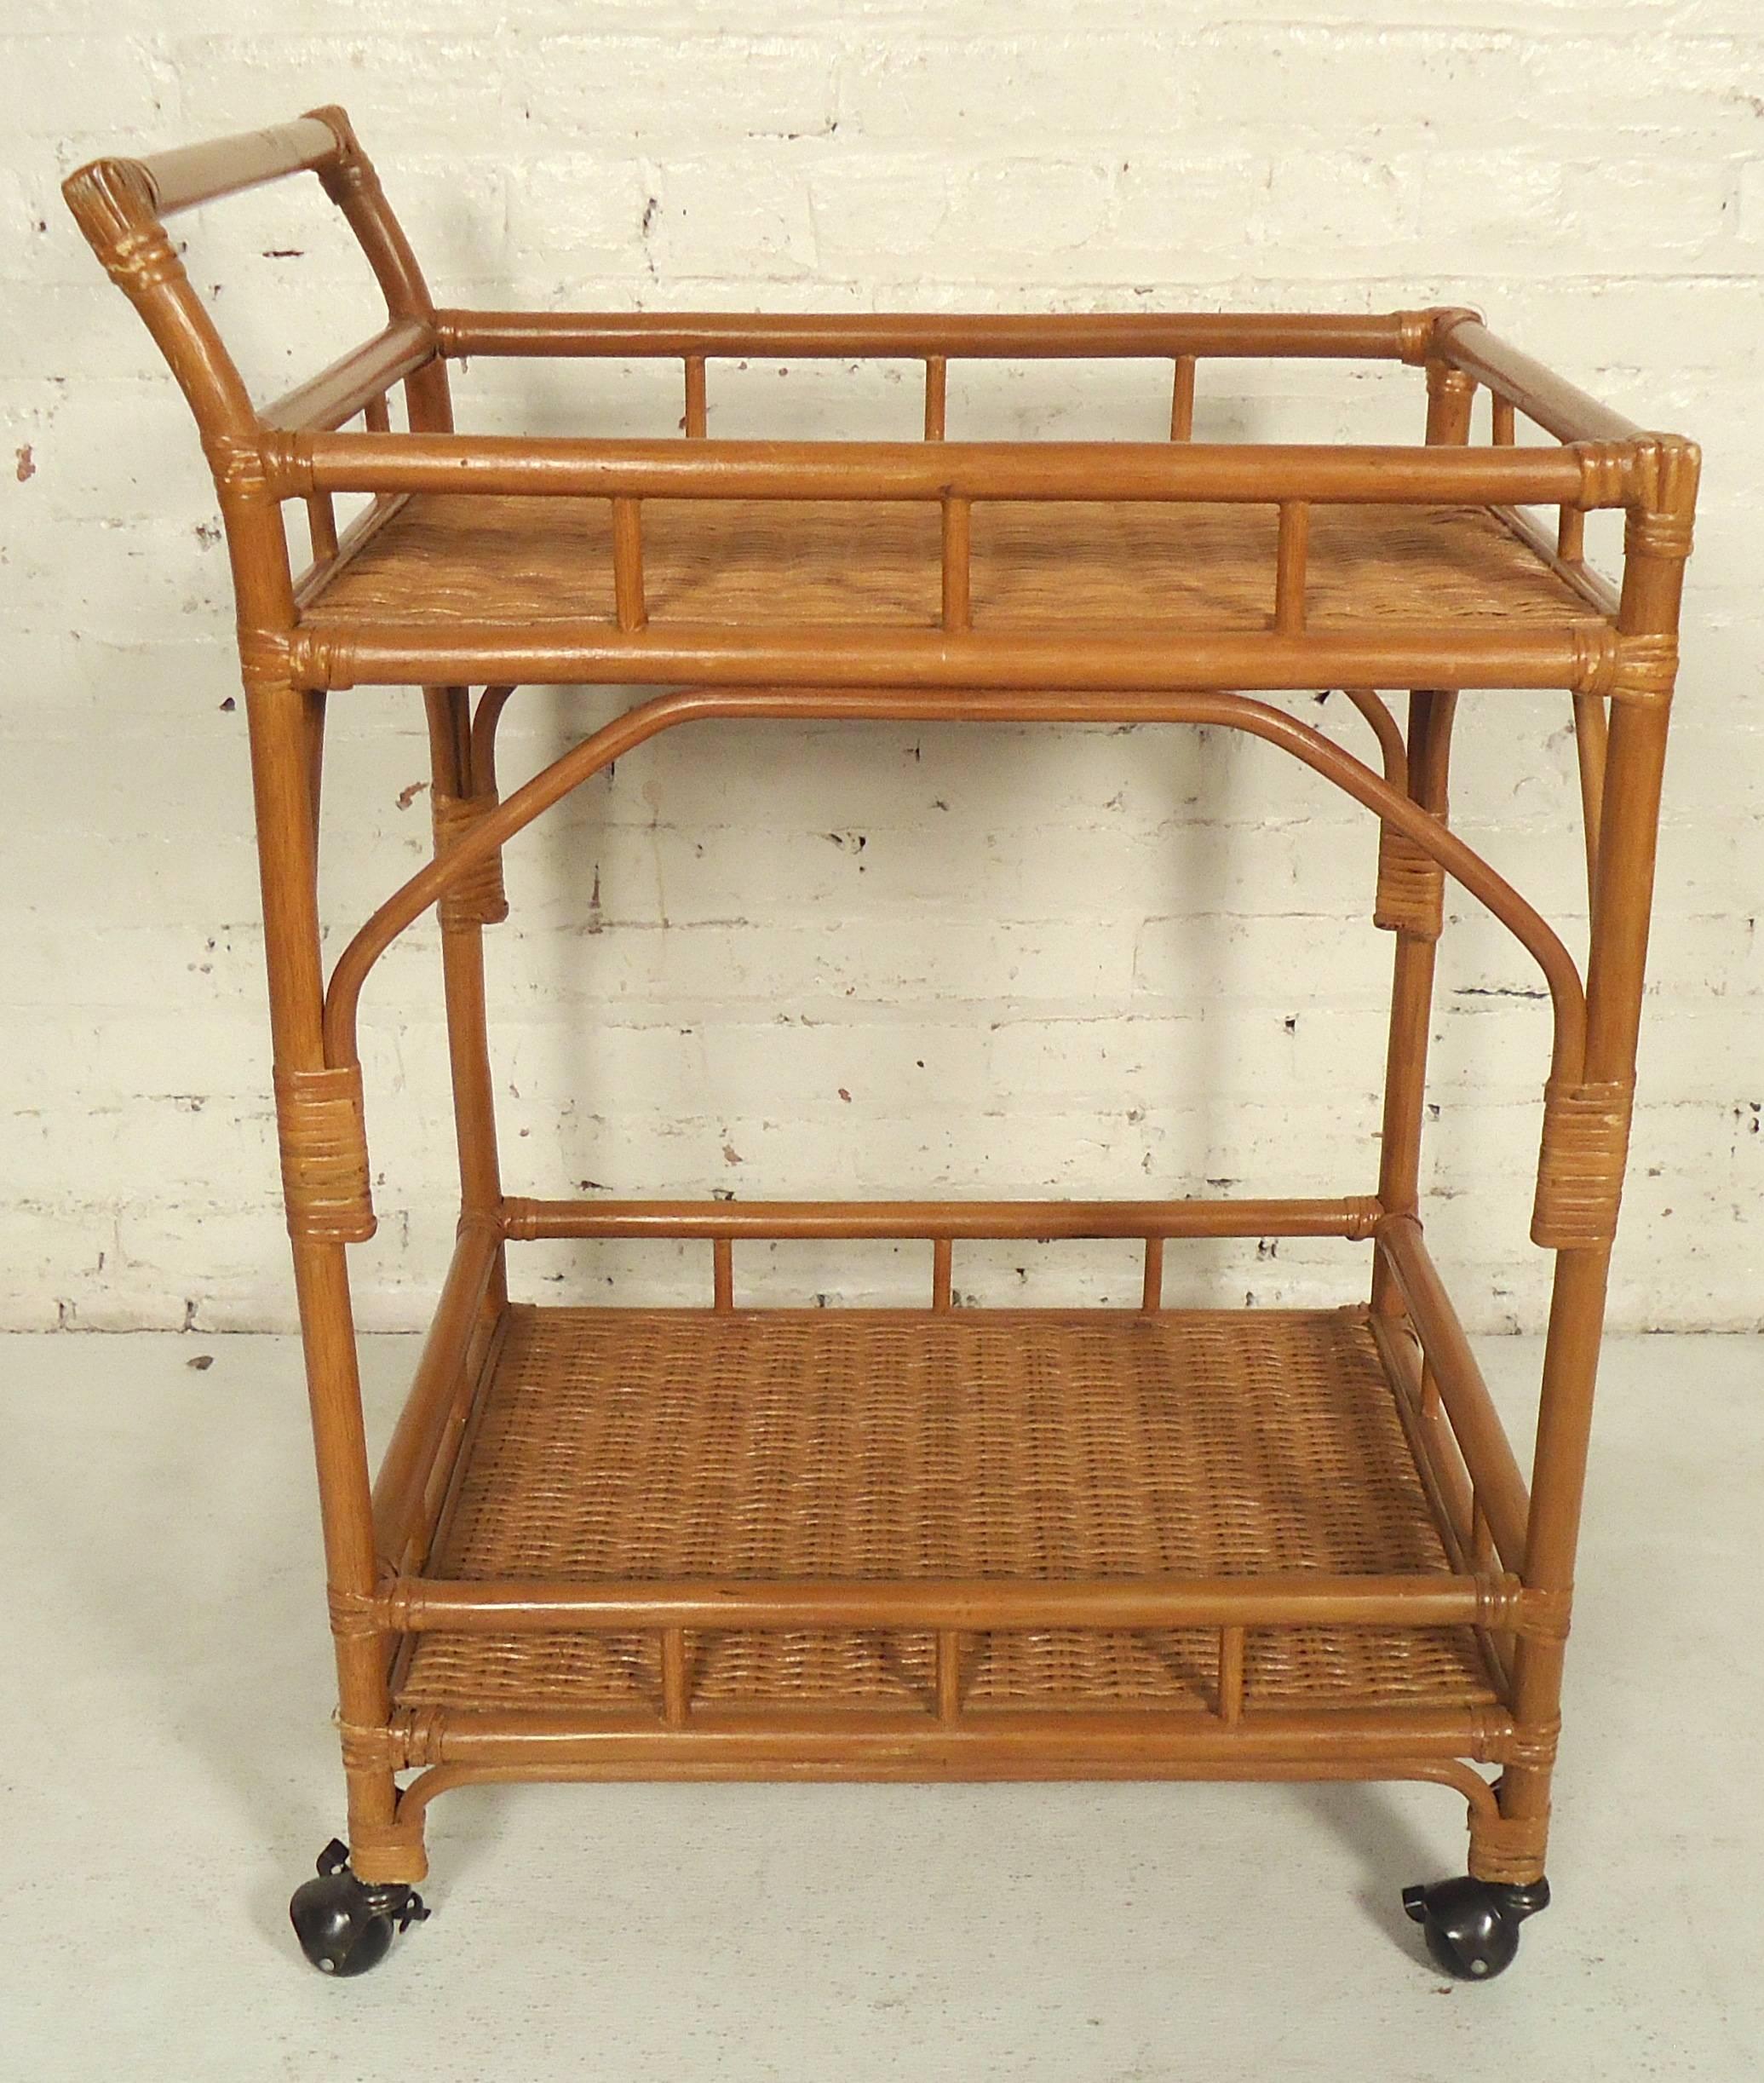 Rolling cart with two shelf levels and nice wicker accents throughout. Great as a serving or bar cart.

(Please confirm item location - NY or NJ - with dealer).
  